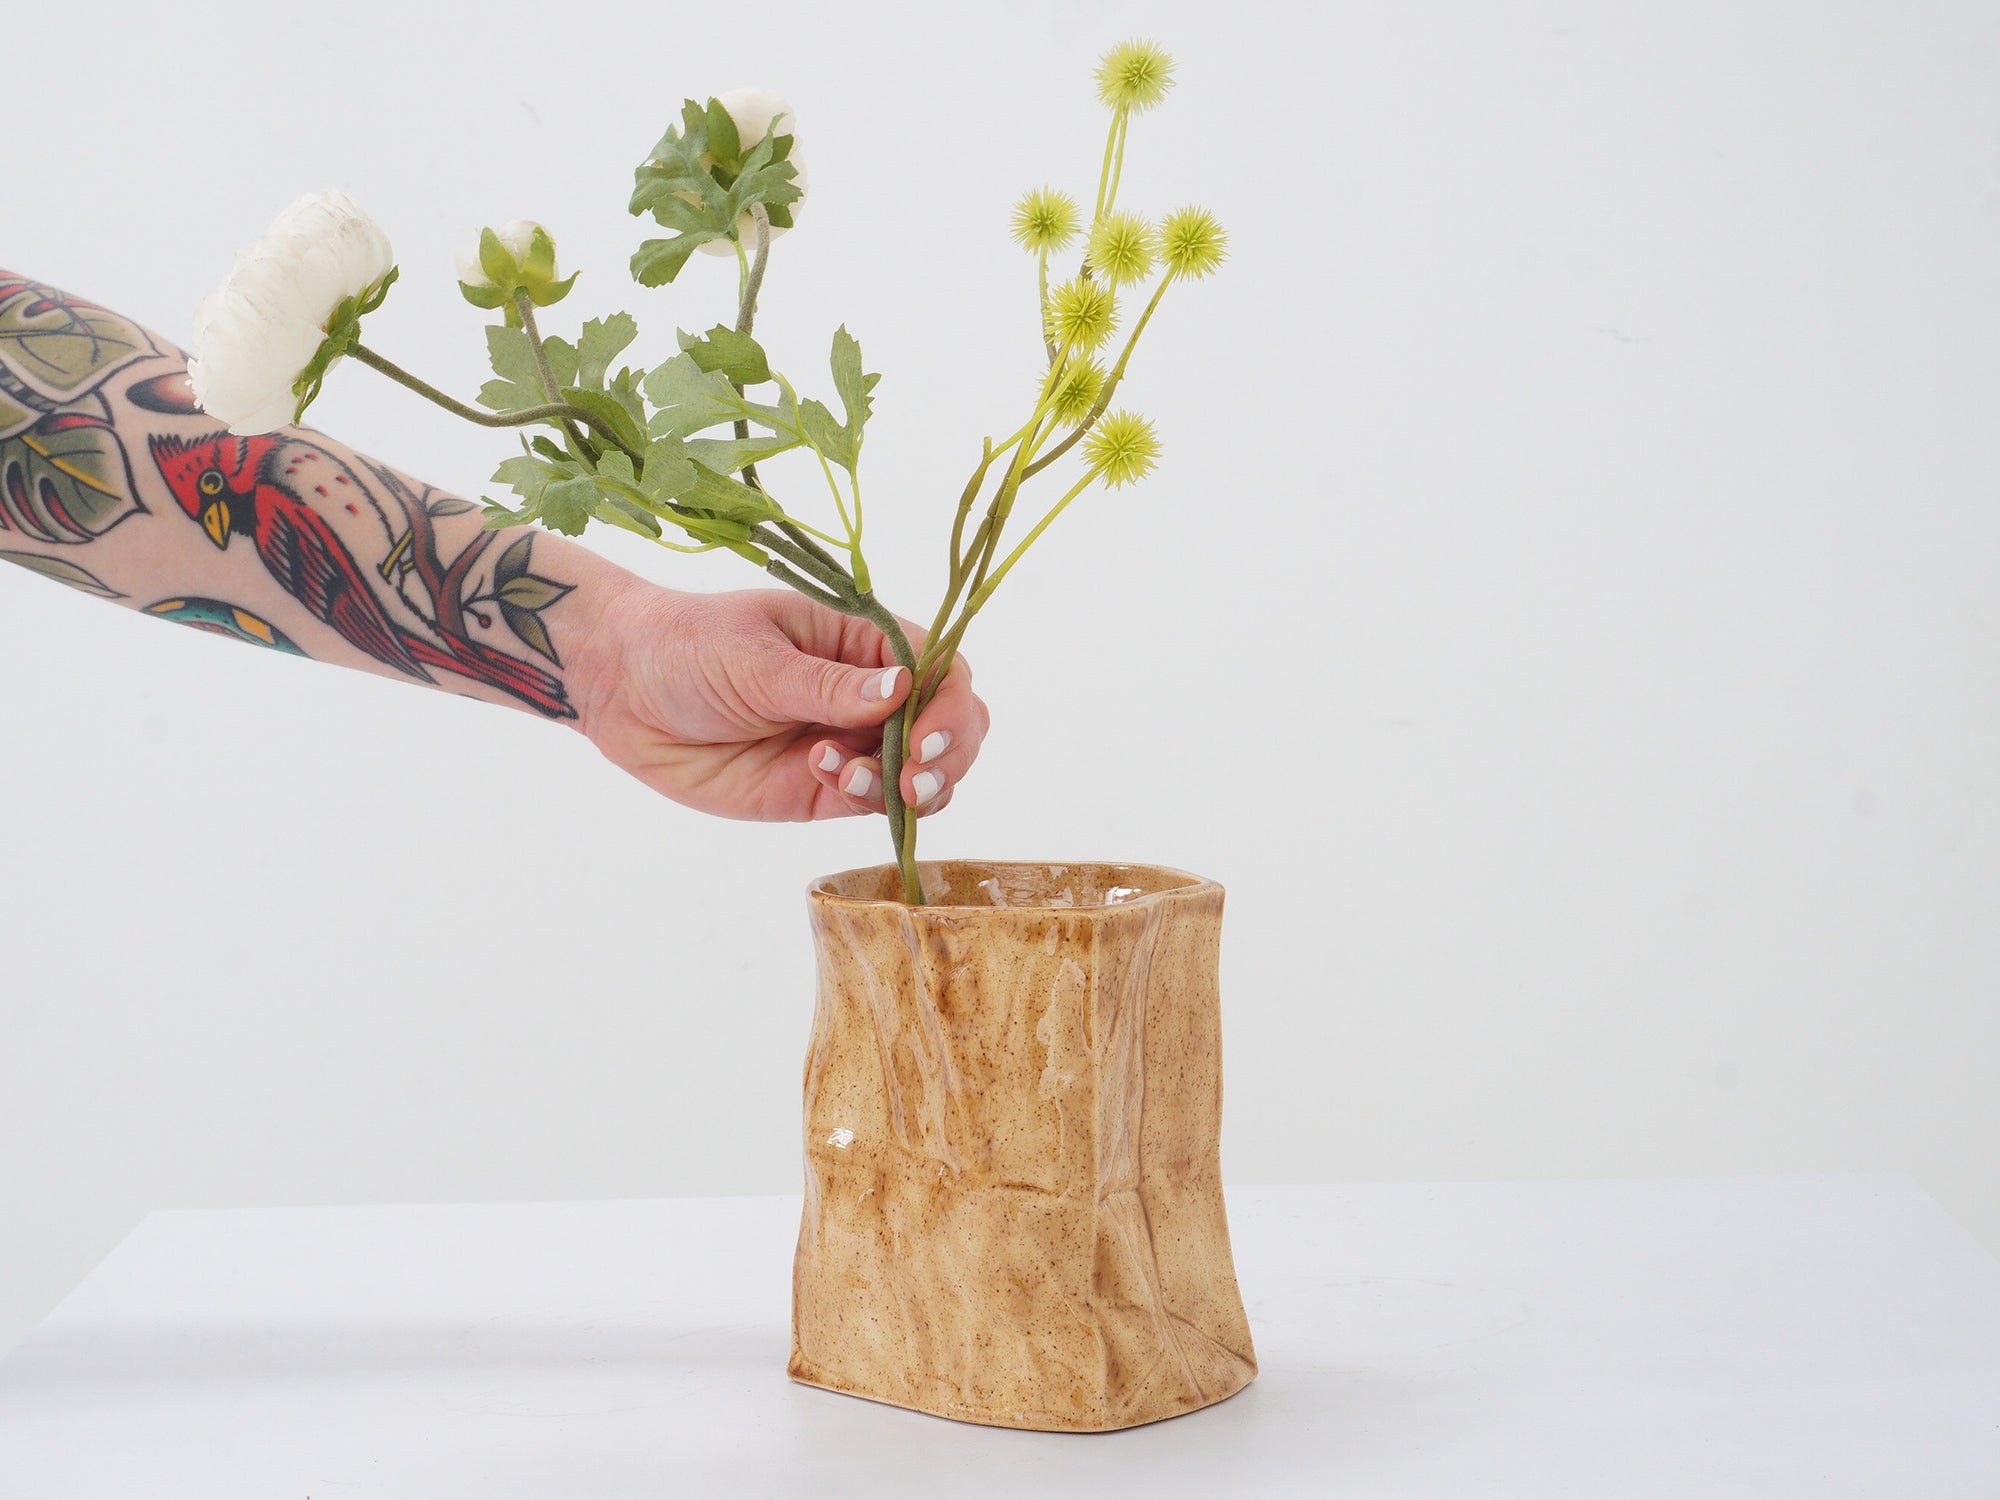 Ceramic paper bag vase with hand and flowers reaching in from left